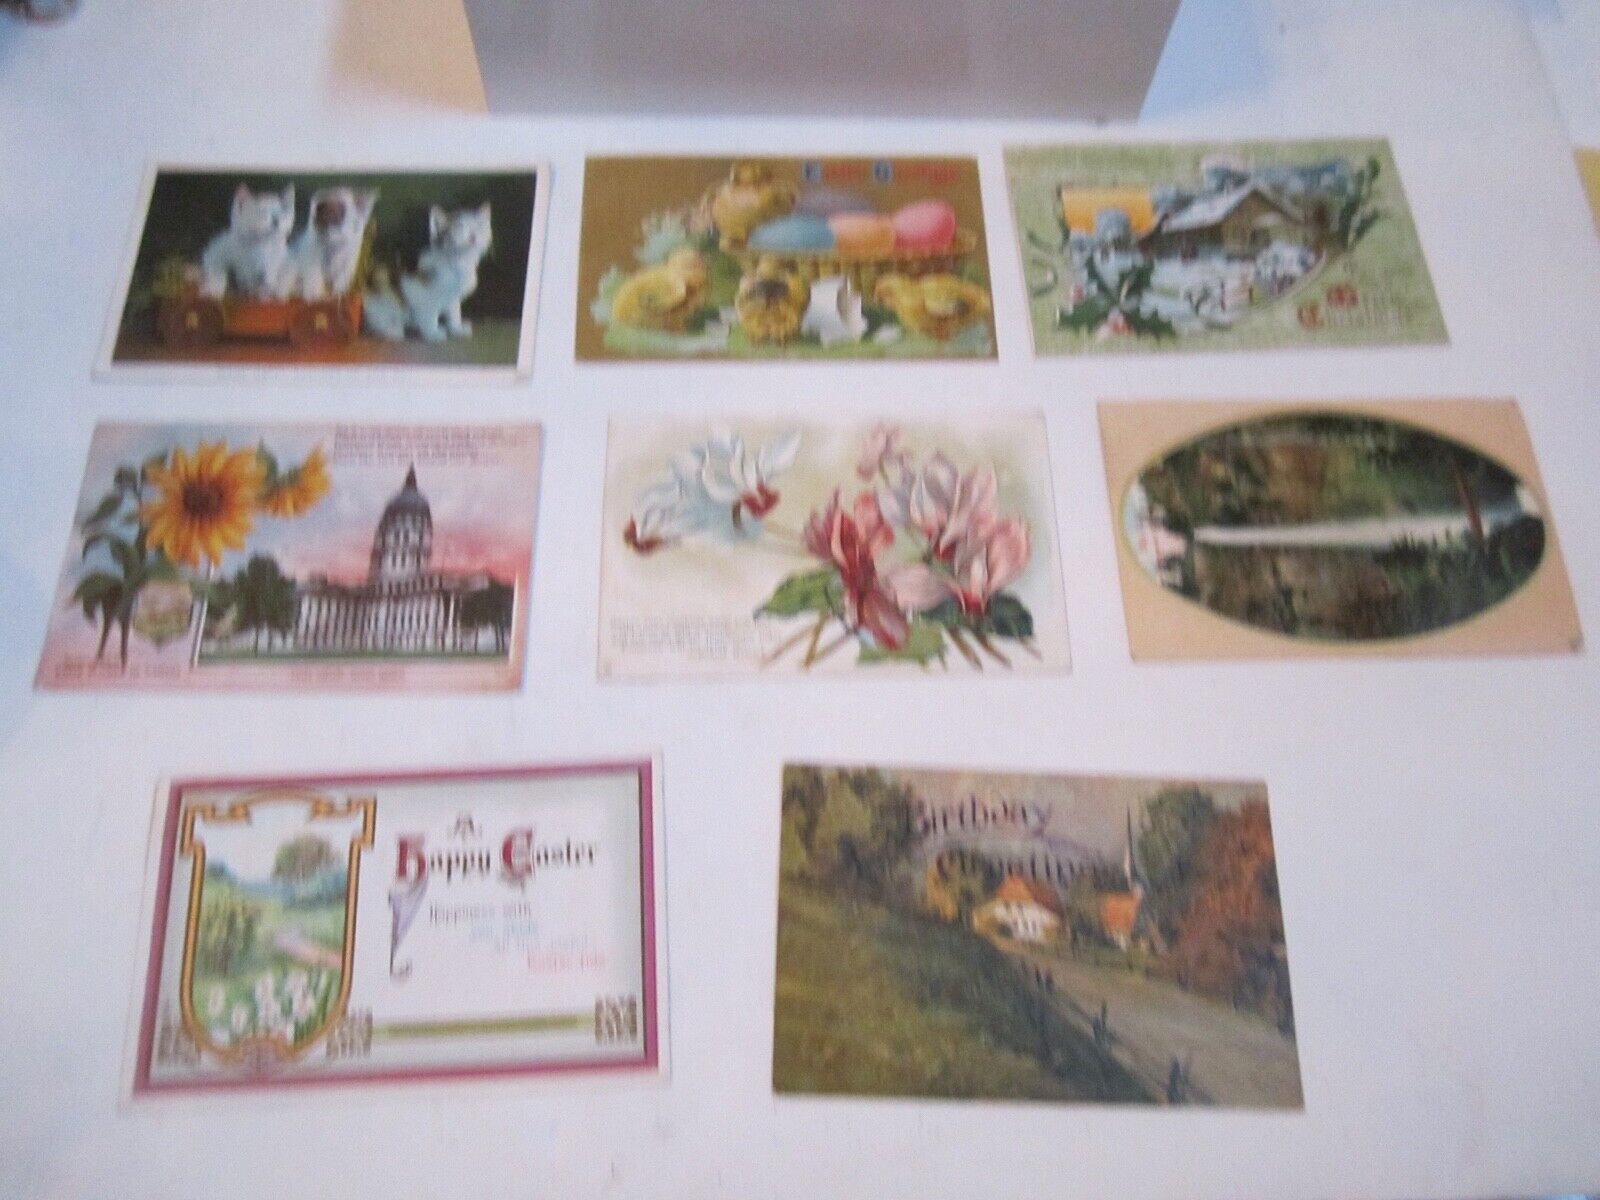 48 ANTIQUE POSTCARDS FROM 1908 - 1912 - UNSEARCHED - FIND YOUR TREASURES 3 AMA